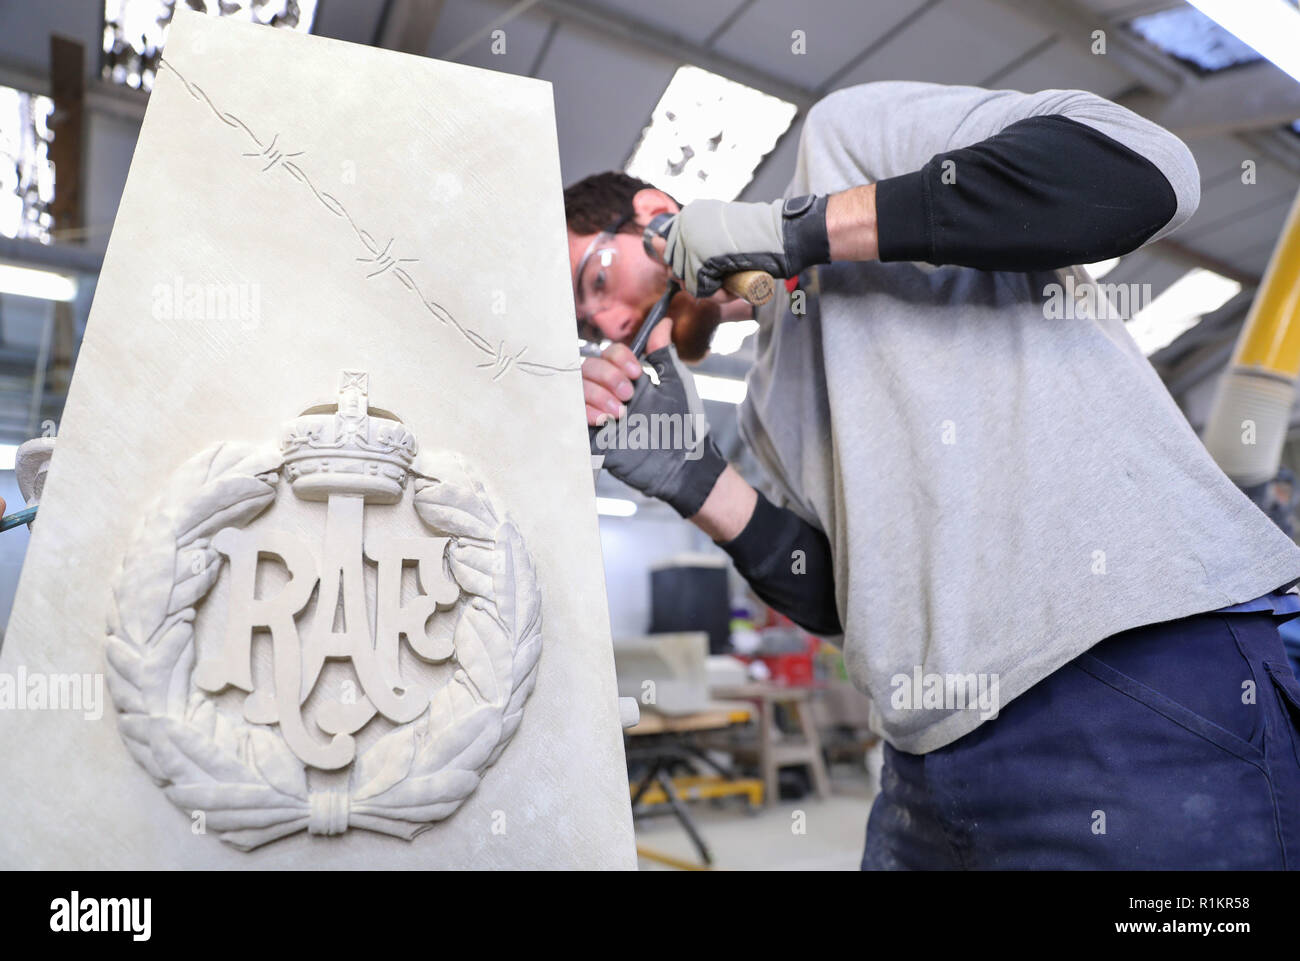 Stone masons from Salisbury cathedral work on a war memorial in their workshop which was designed by prisoners from Erlestoke prison in Wiltshire, and will be placed outside the prison's visitor's centre. Stock Photo